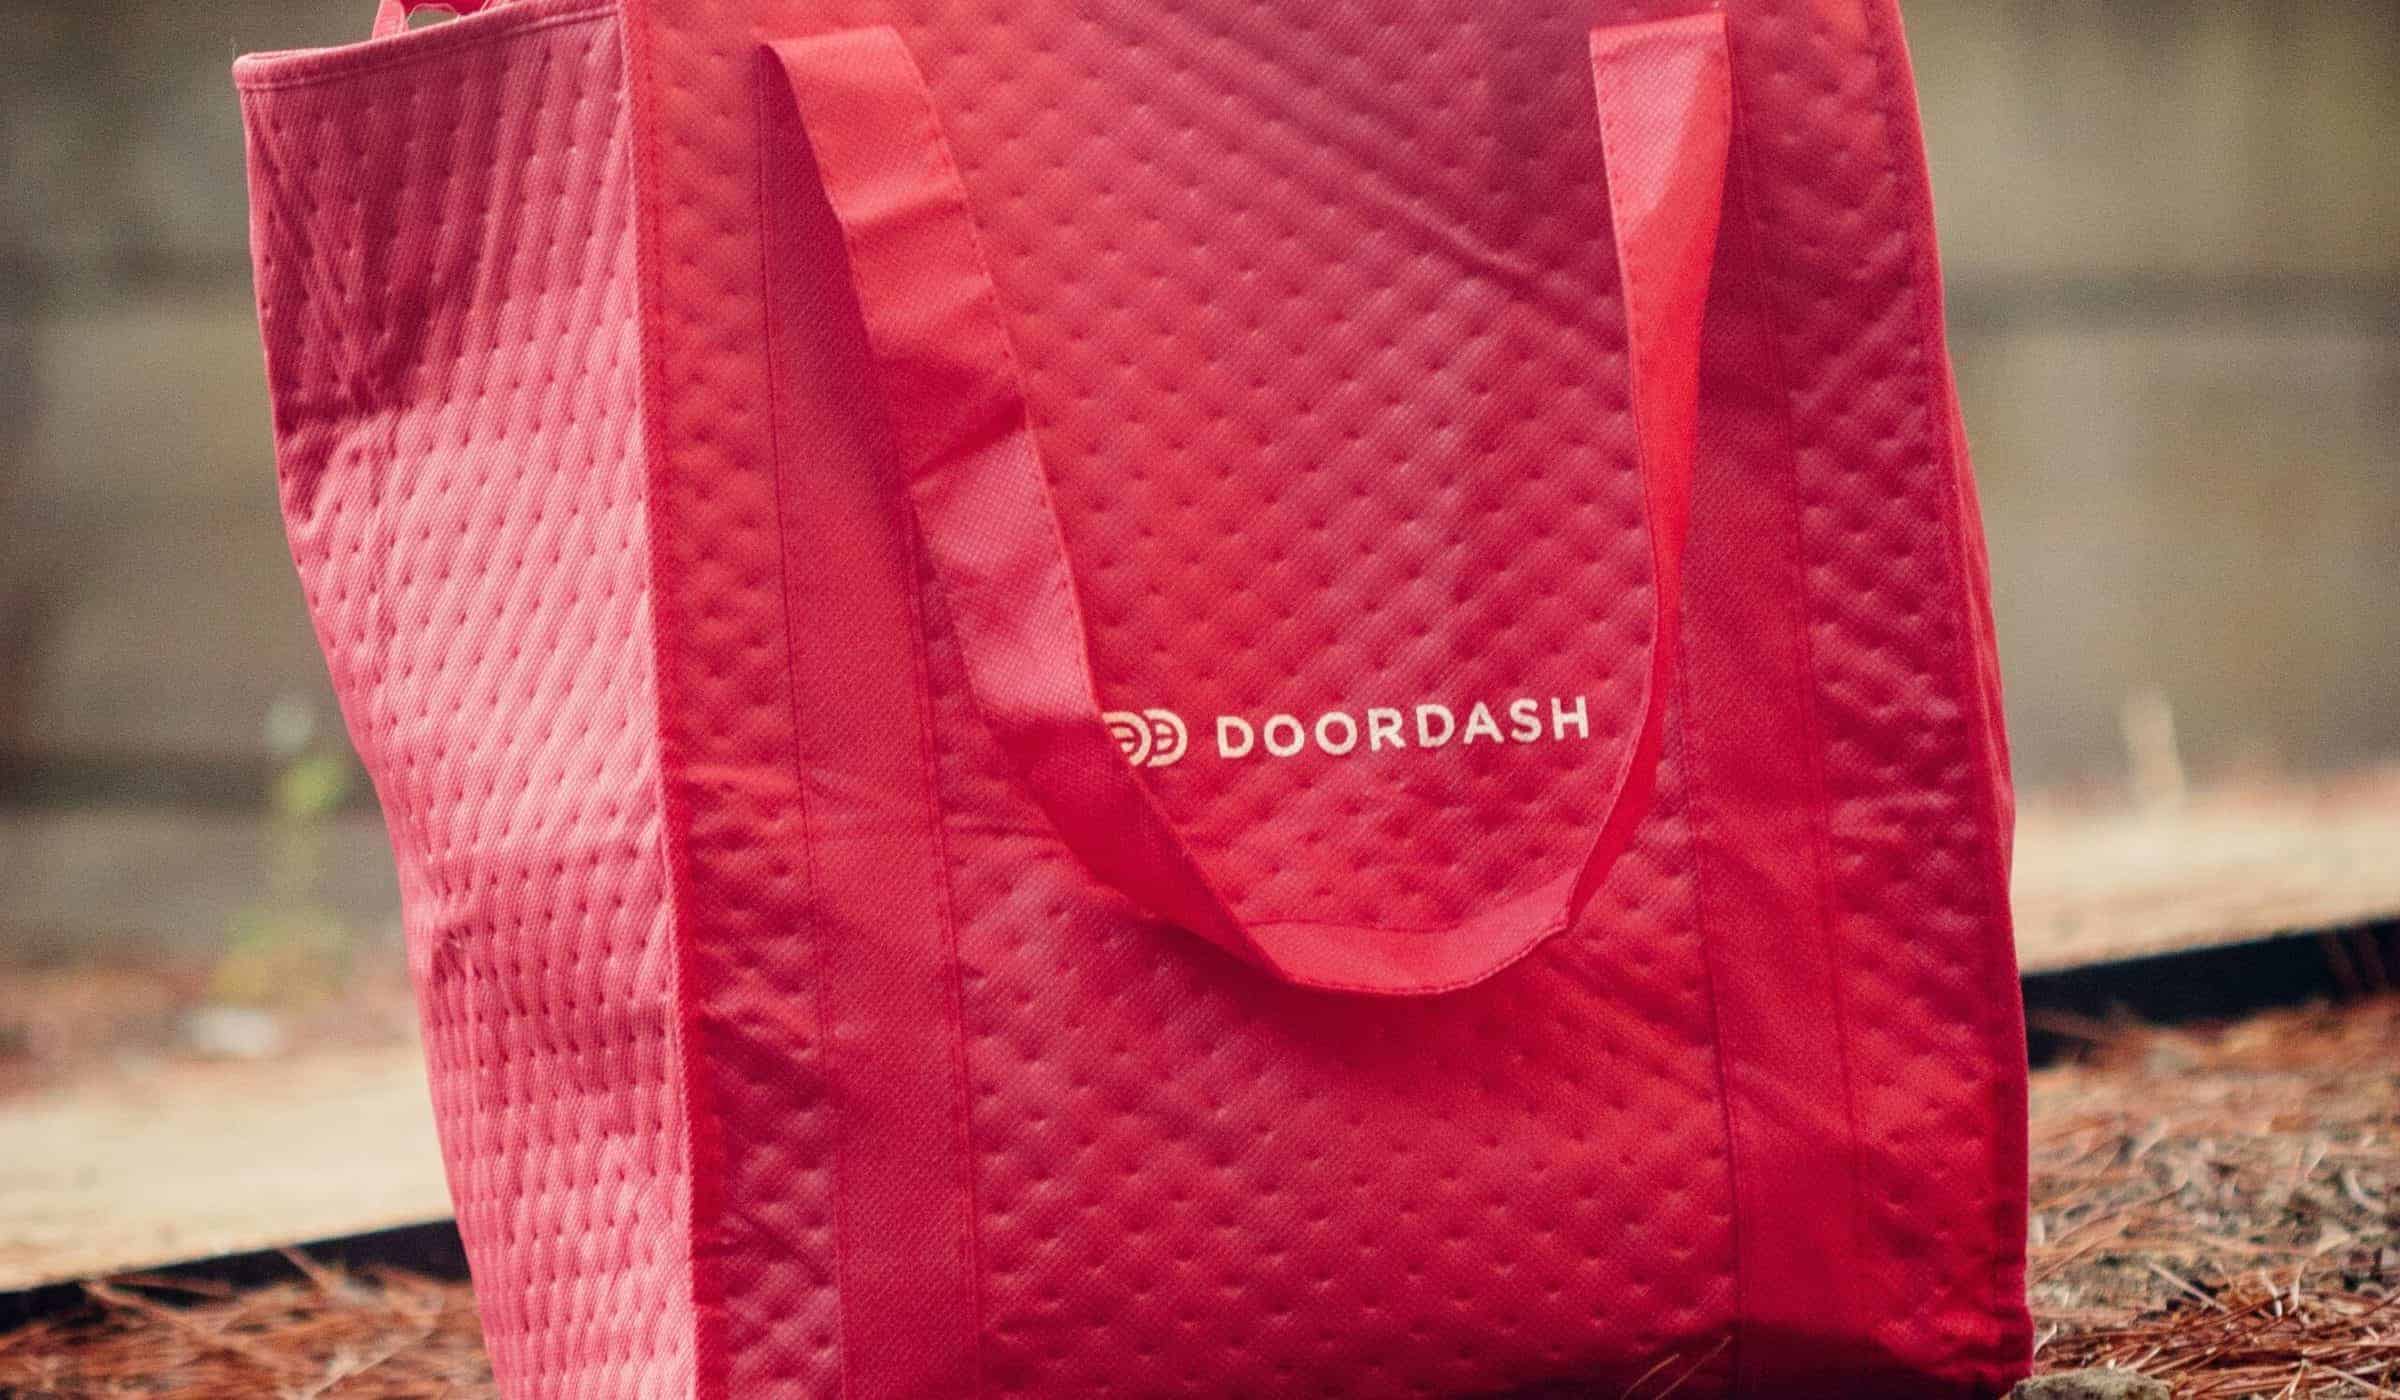 red bag with the "doordash" logo on the front